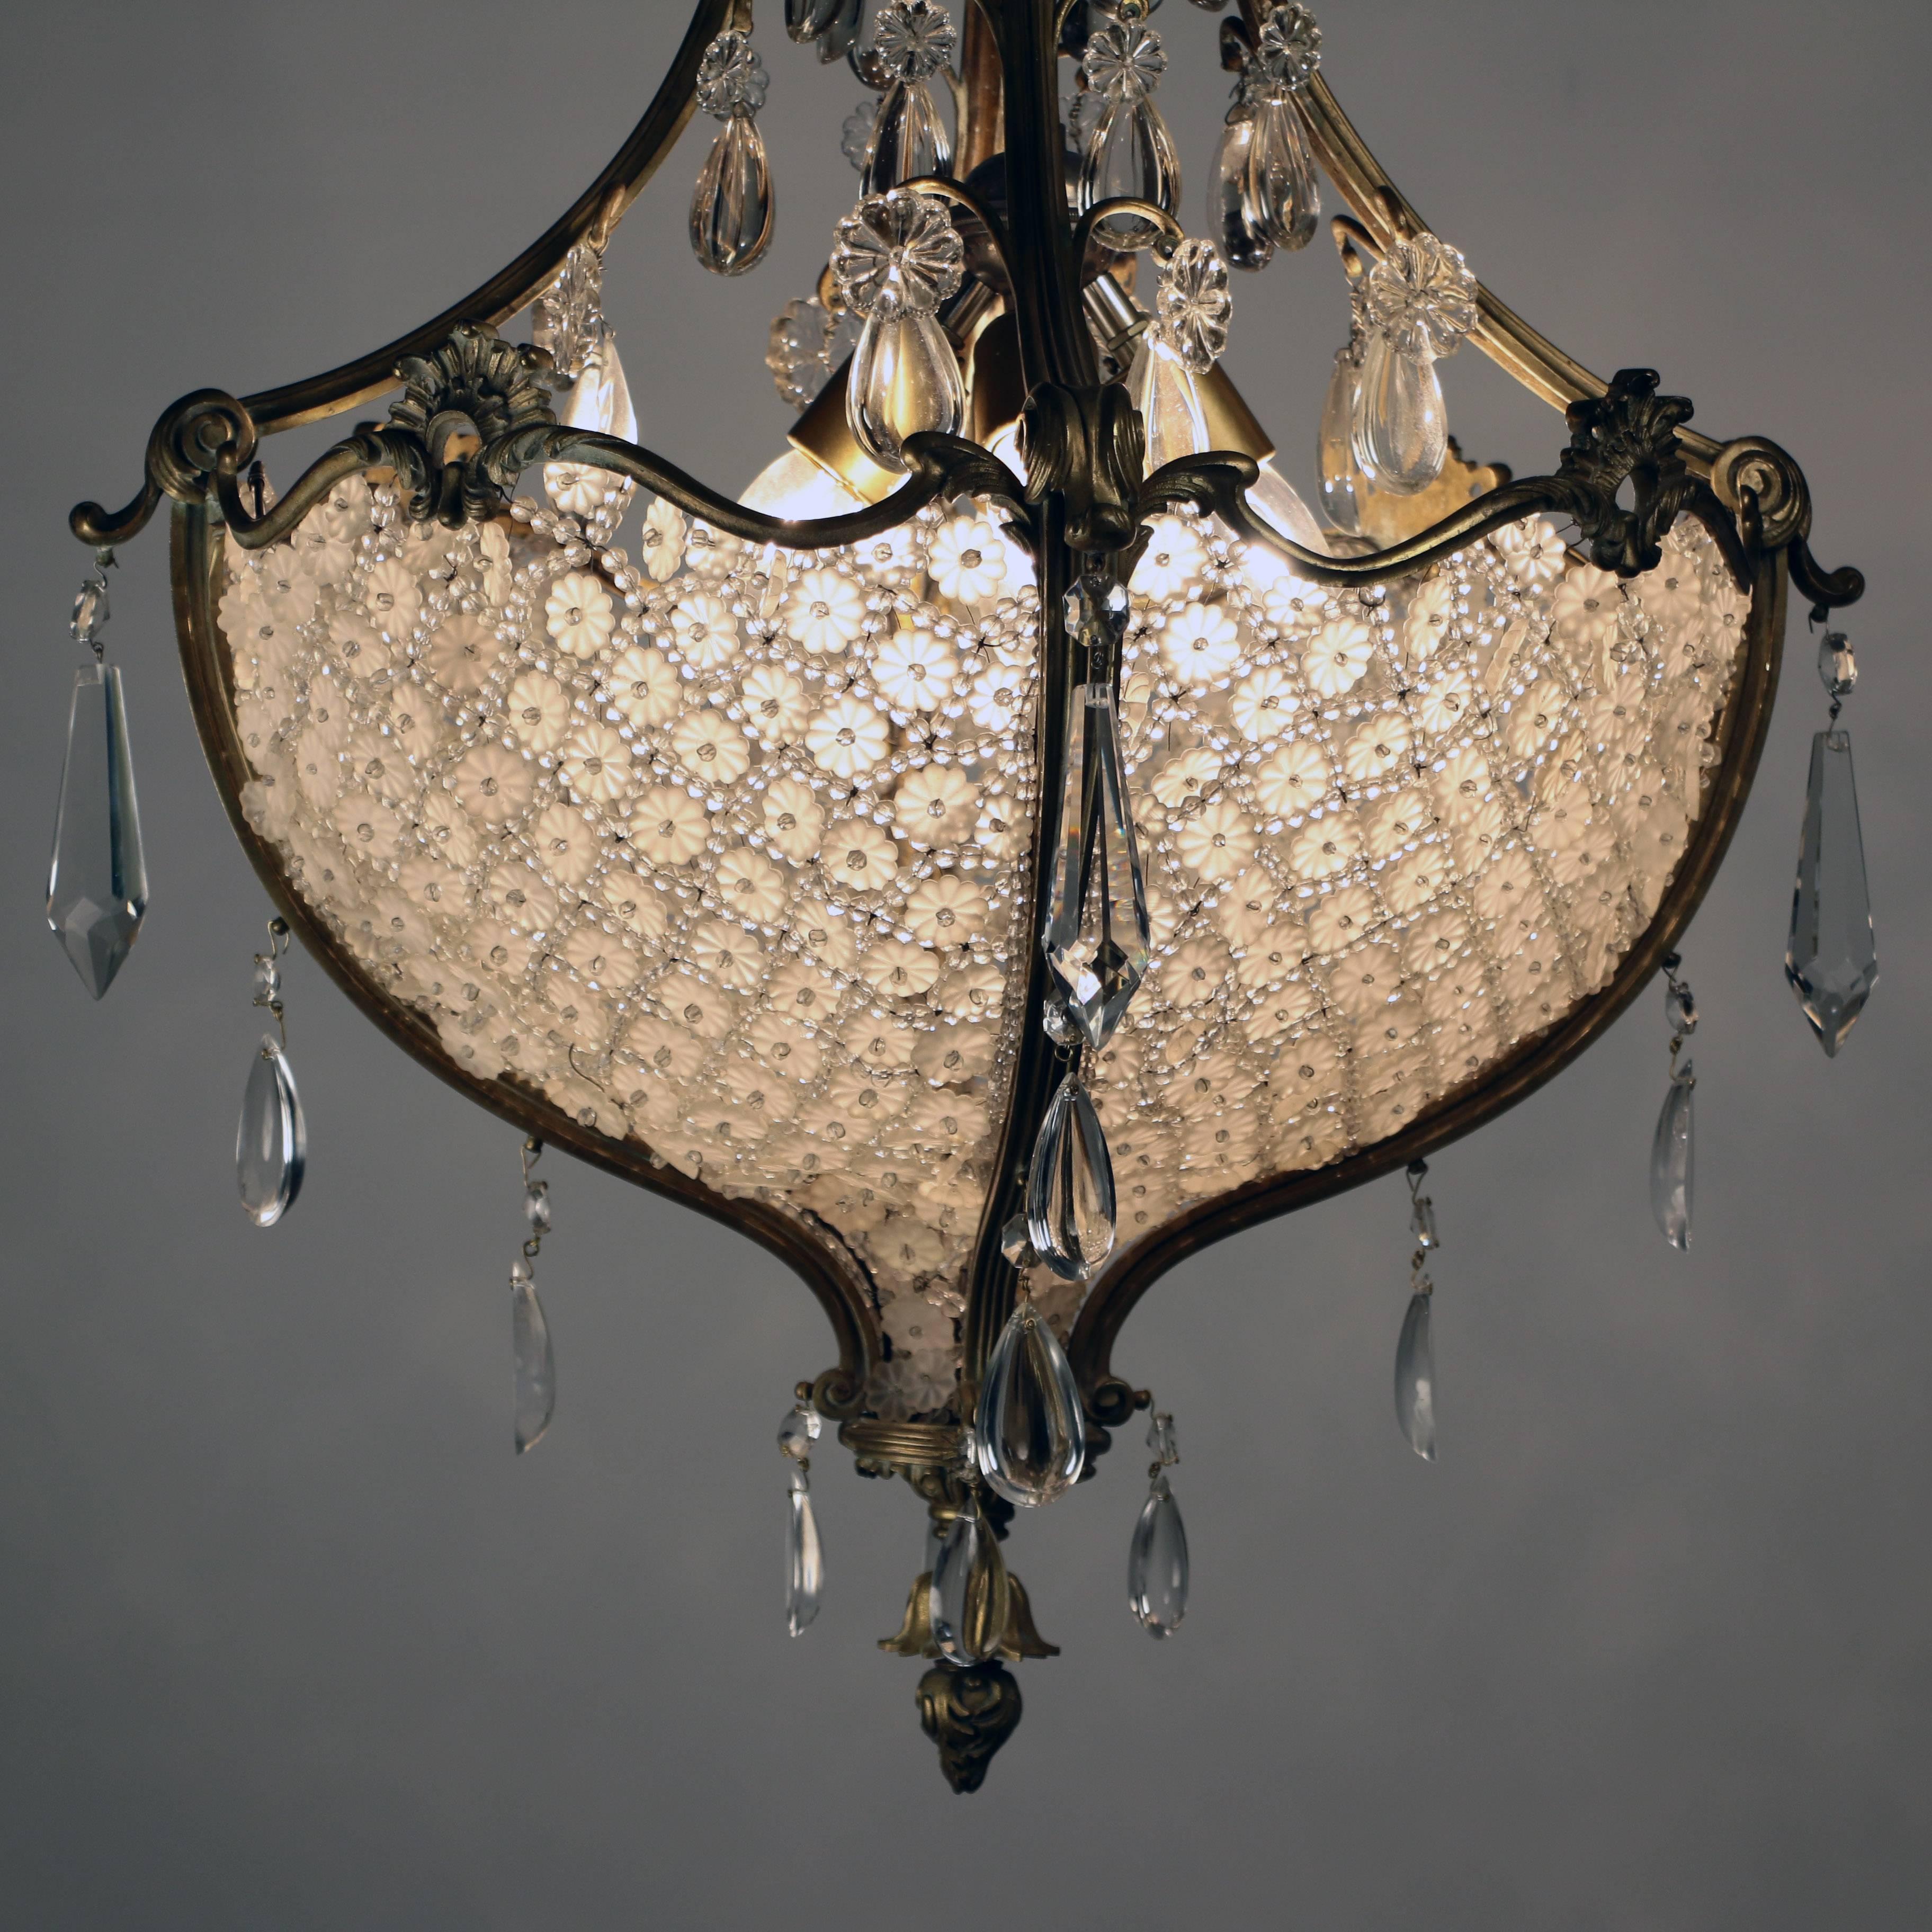 This sumptious chandelier from the Belle Epoque consists largely of a large hemispherical bag filled with basket weave crystals in a lattice of beads and flowerheads, the upper section complements and echos this arrangement.  The rim undulates which